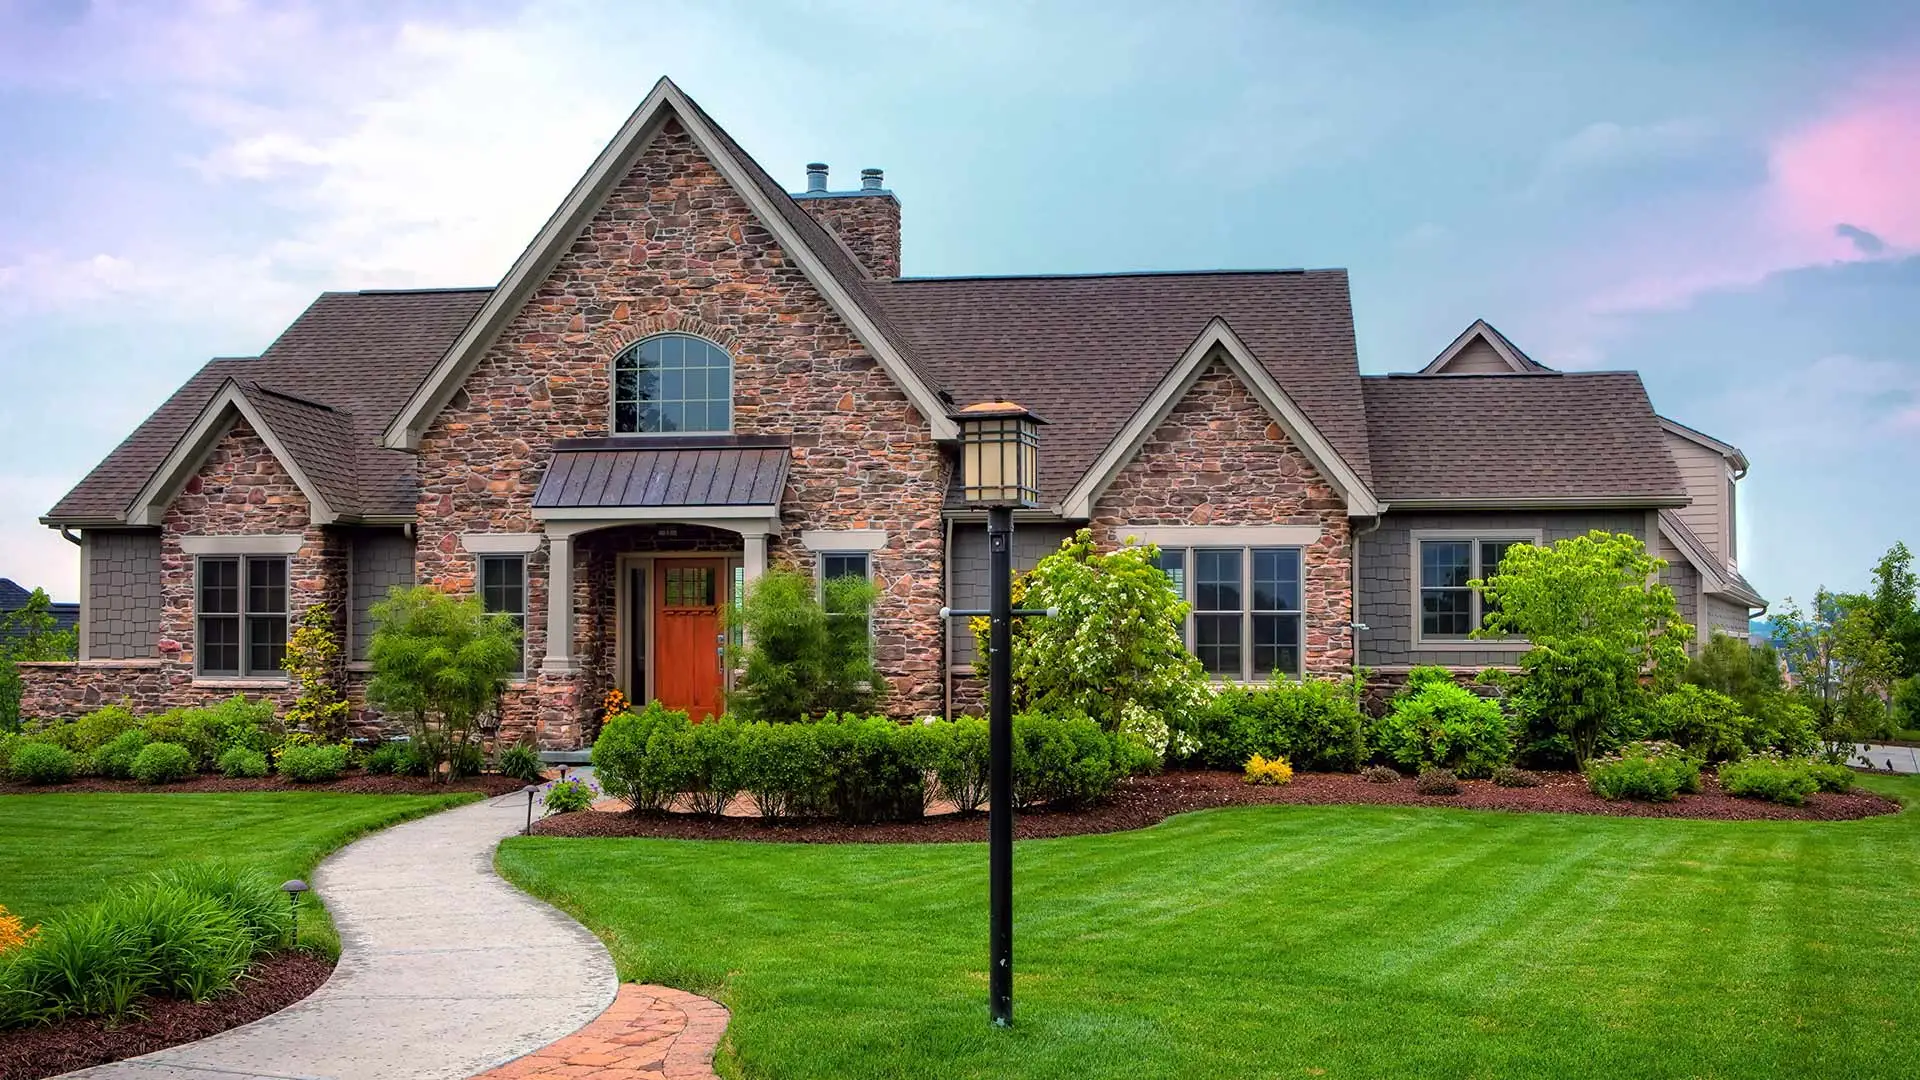 Gorgeous stone with currated lawn and landscaping home in Charlotte, NC.